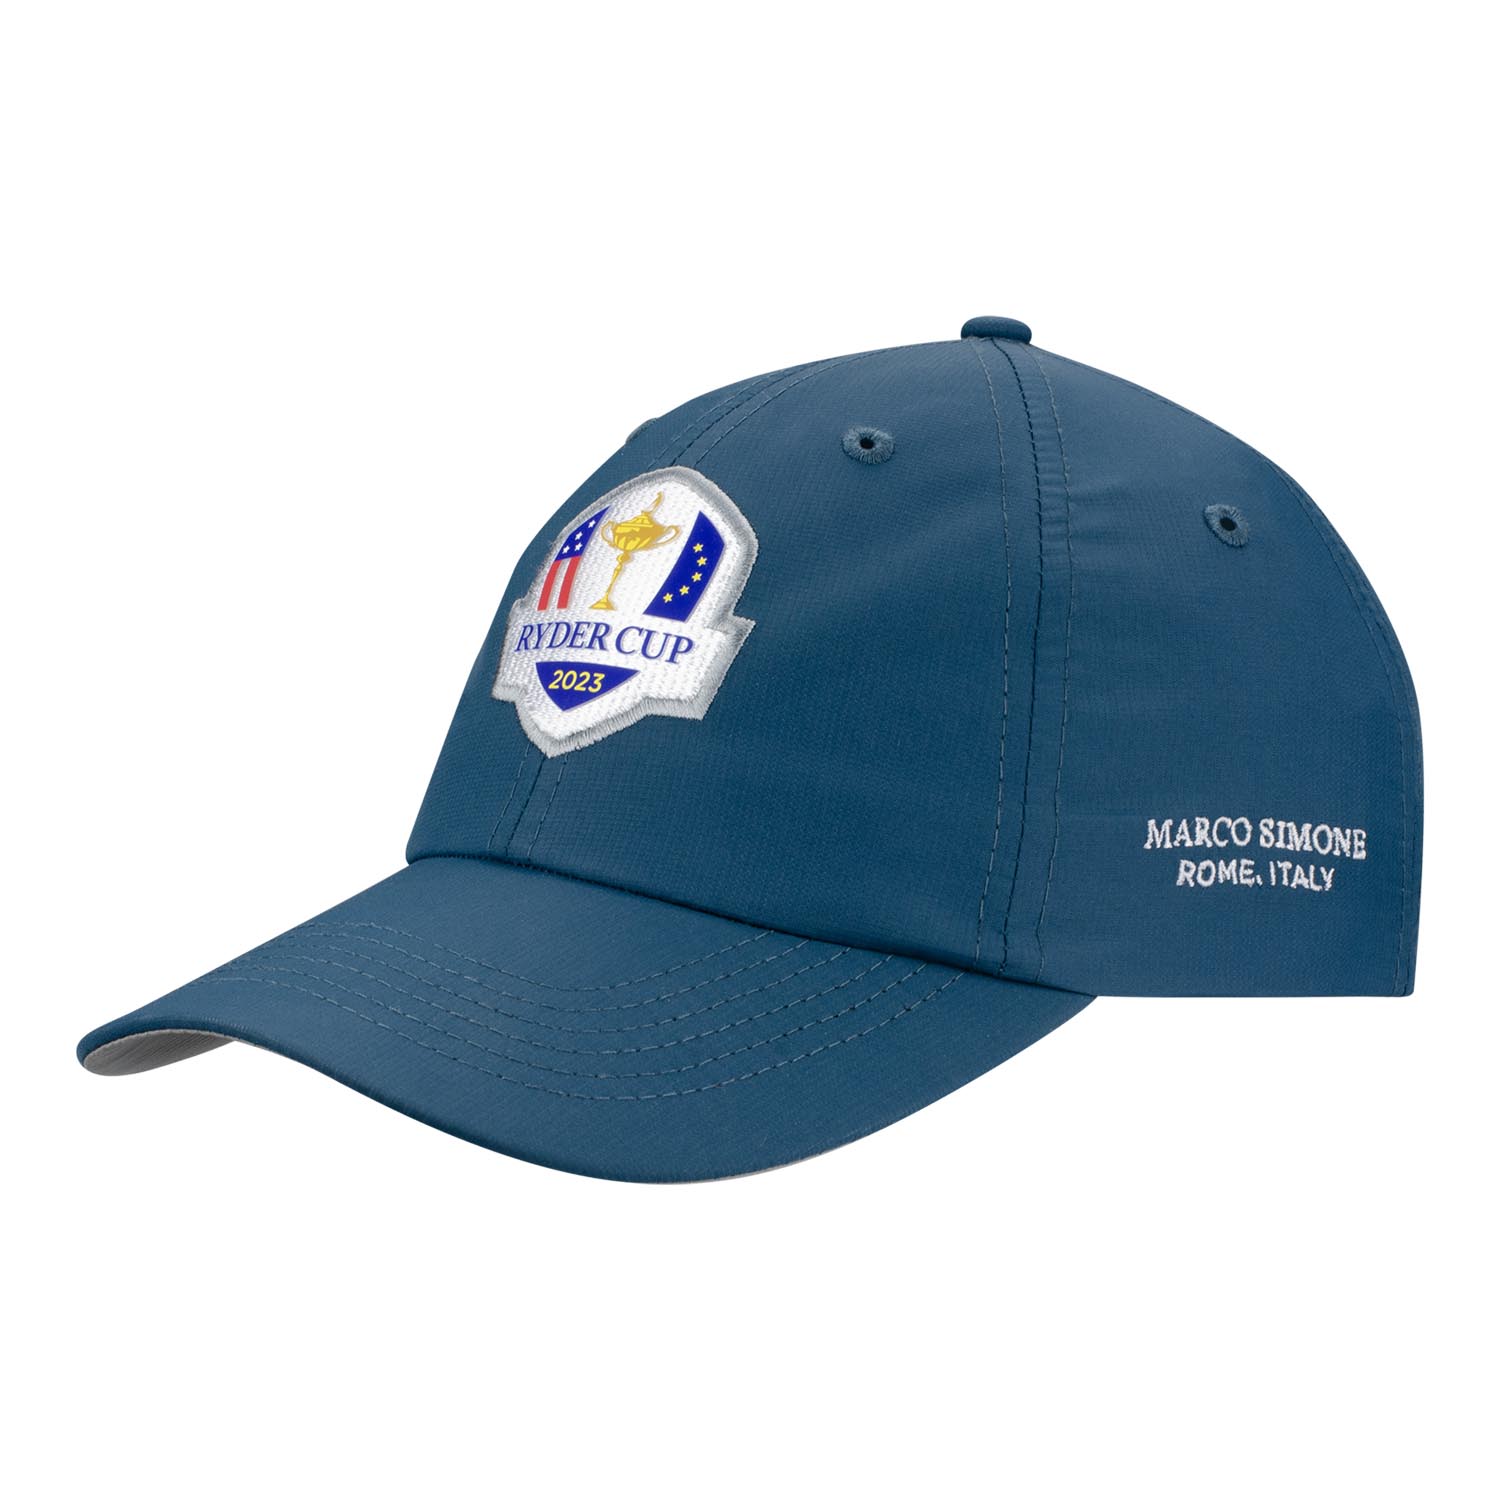 Imperial 2023 Ryder Cup The Original Performance Cap in Petrol- Side View